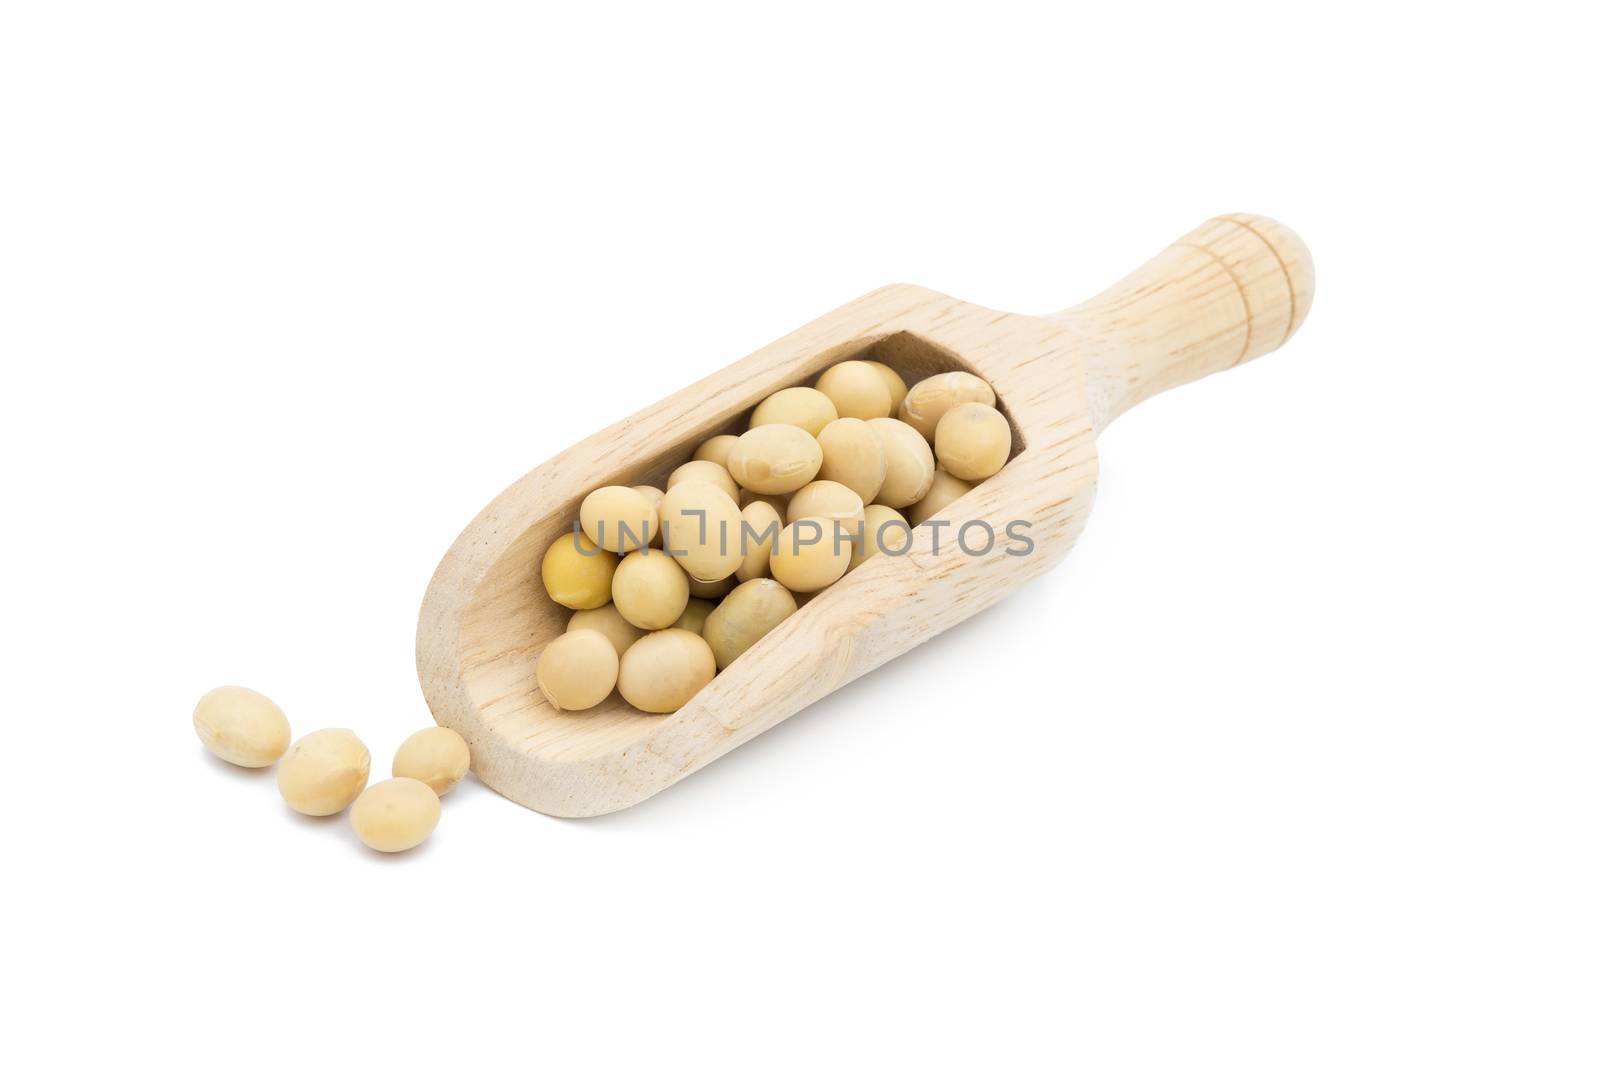 Soybean in wooden scoop isolated on white background by kaiskynet